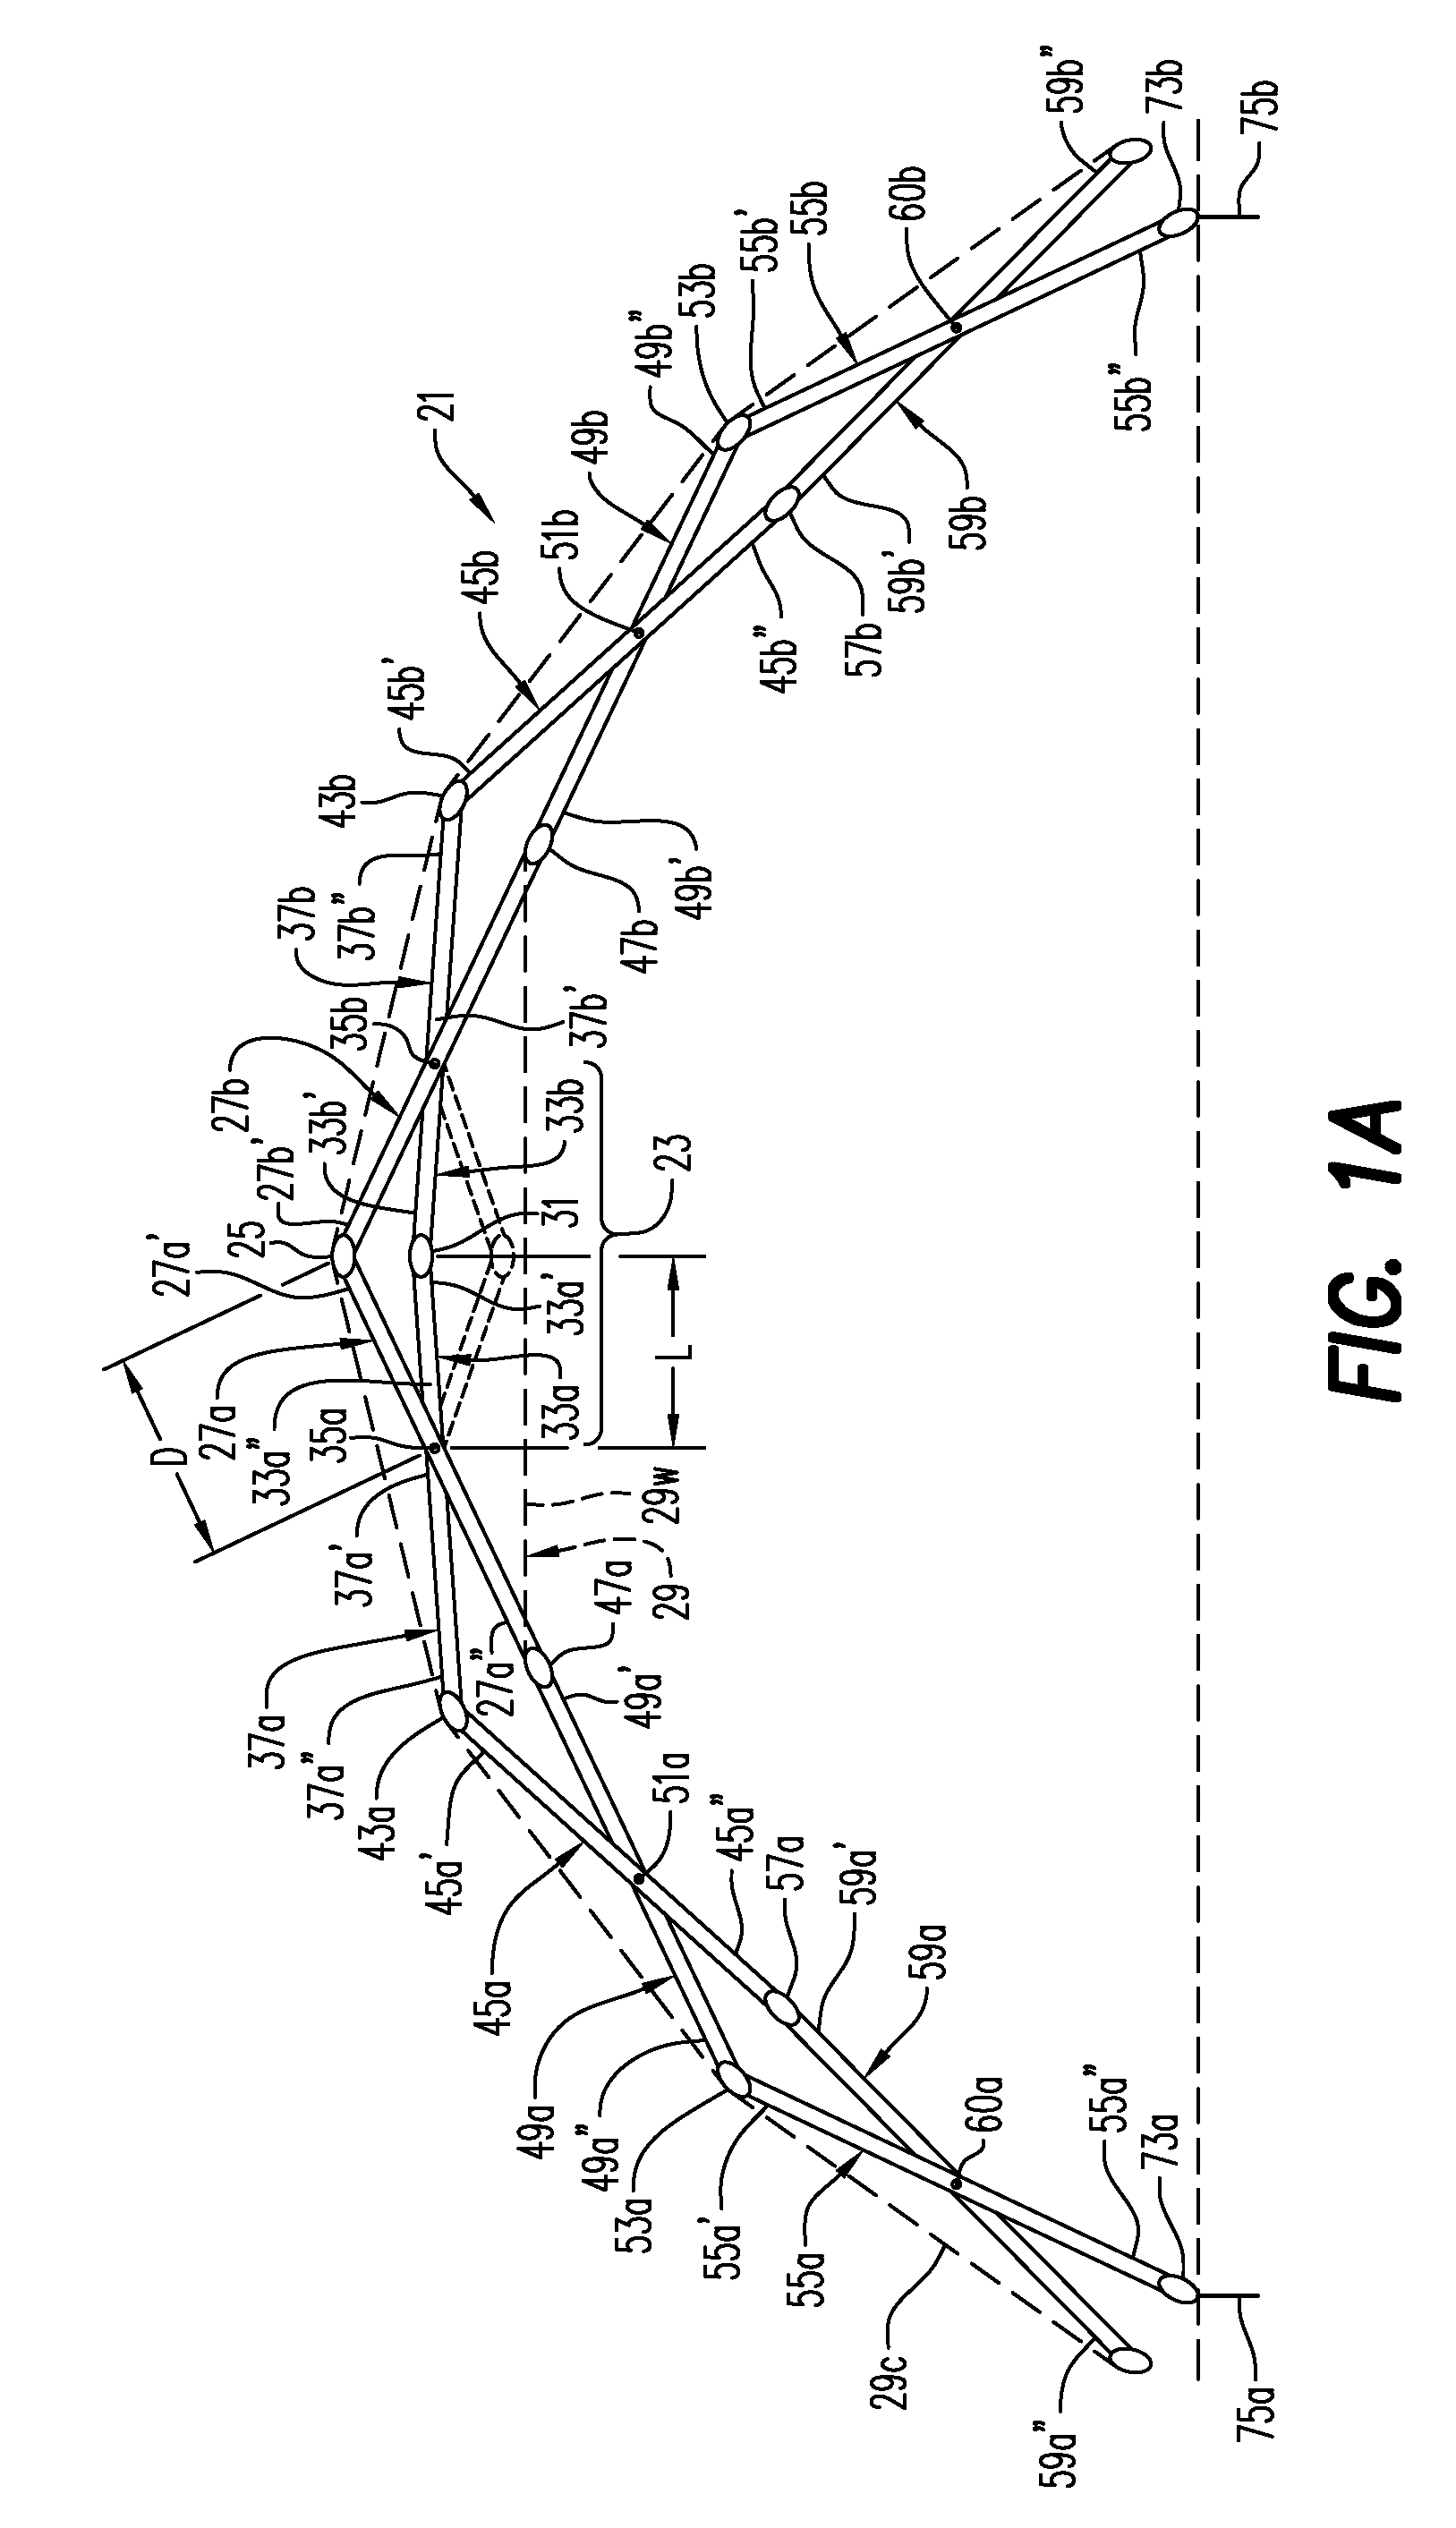 Collapsible structure with self-locking mechanism and method of erecting a collapsible structure